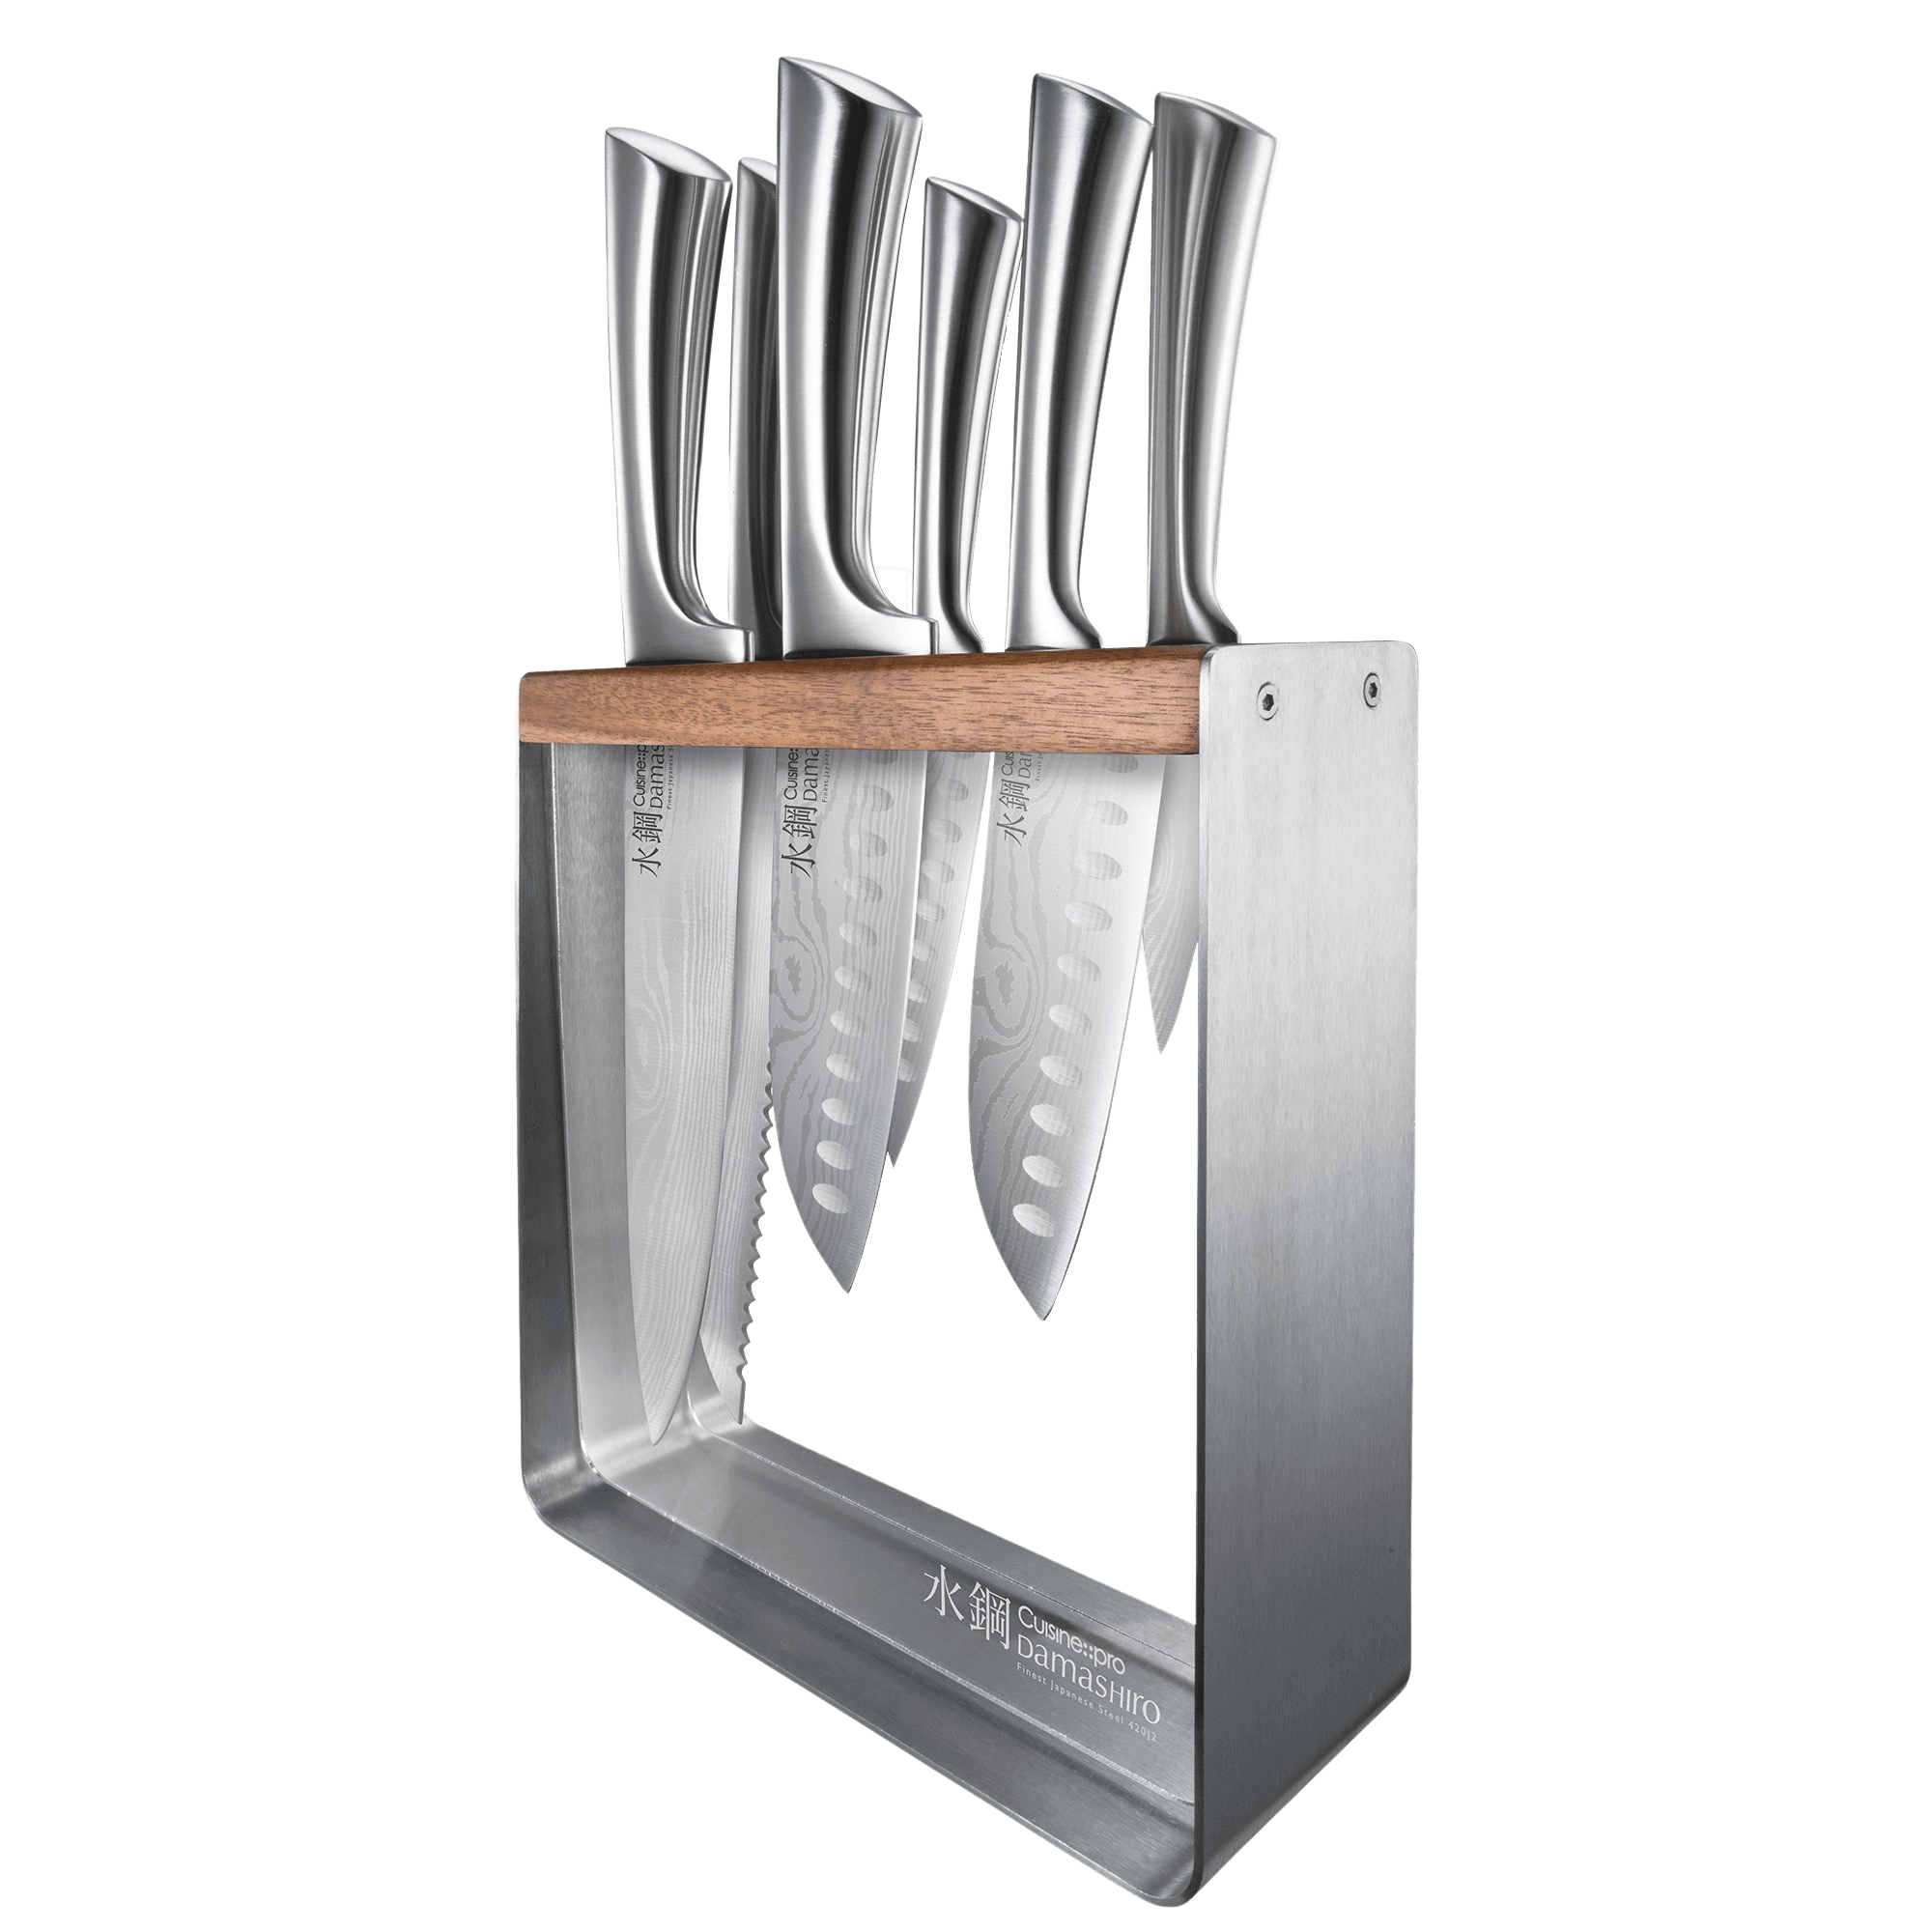 Dropship Classic Japanese Steel 12-Piece Knife Block Set With Built-in  Knife Sharpener, Black to Sell Online at a Lower Price